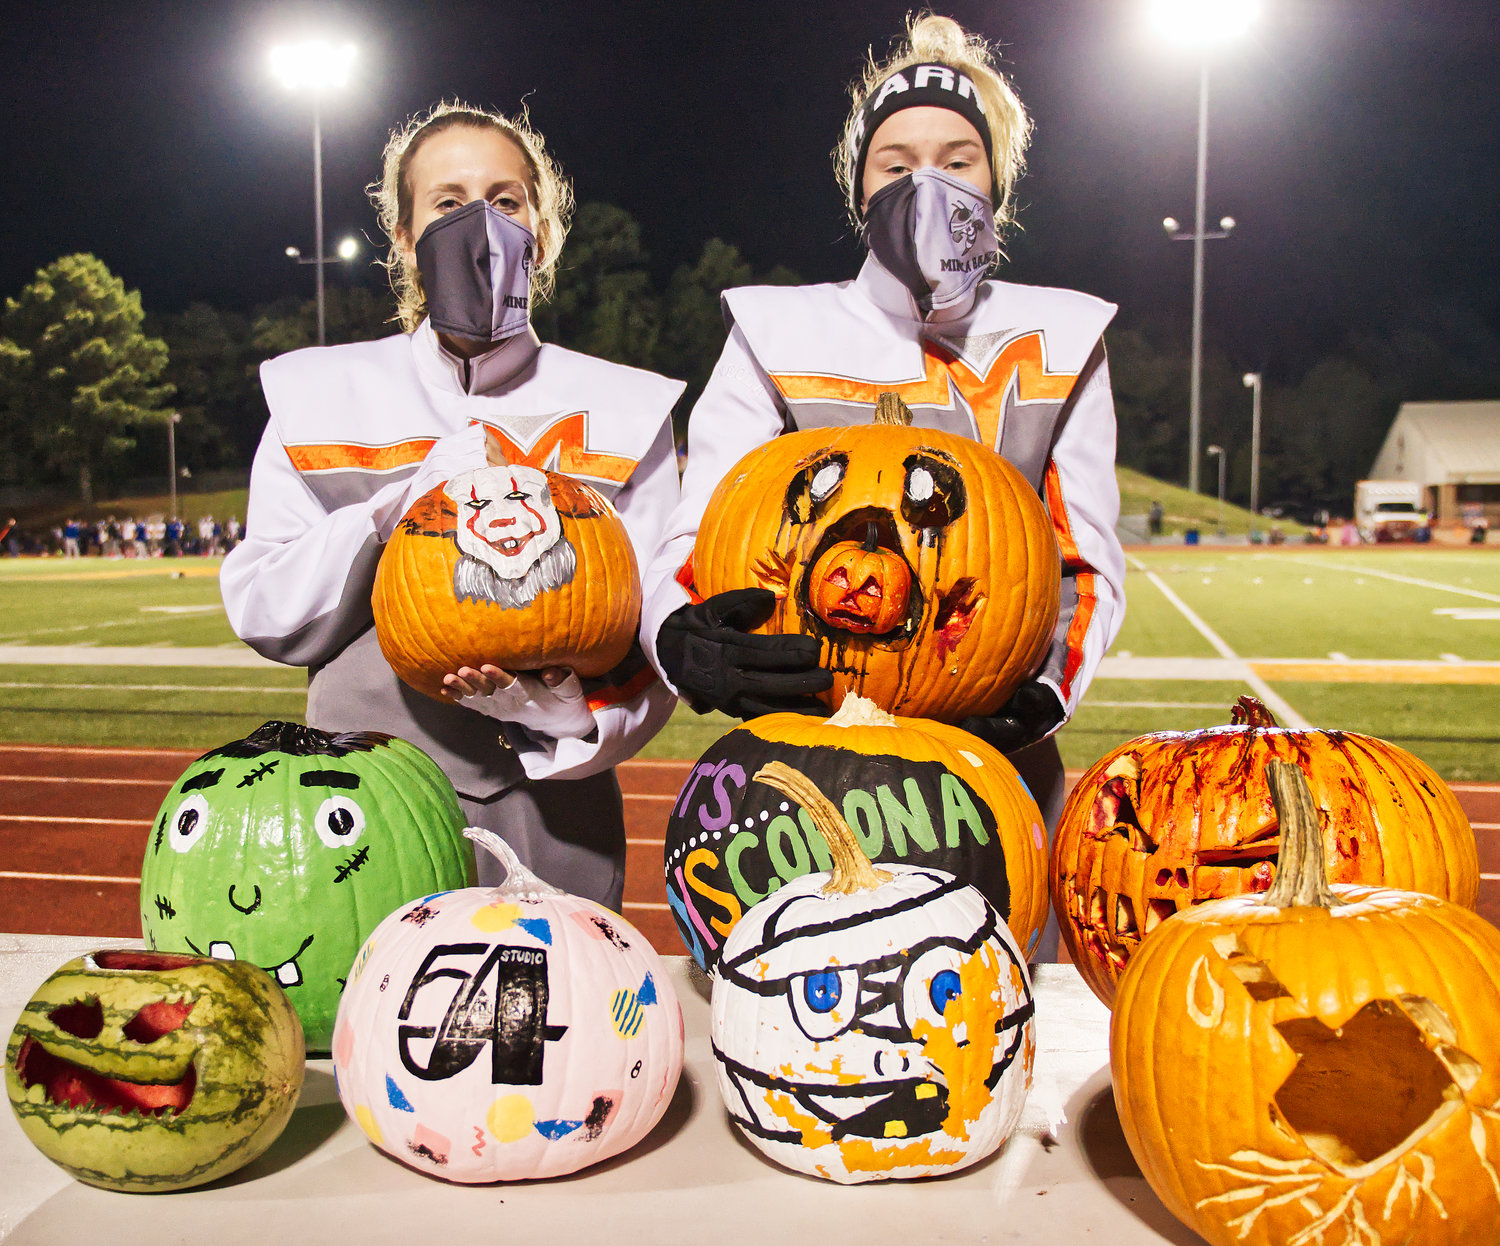 Maddie Tucker and Toni Brannan were winners of the Mineola High School band pumpkin decorating contest.